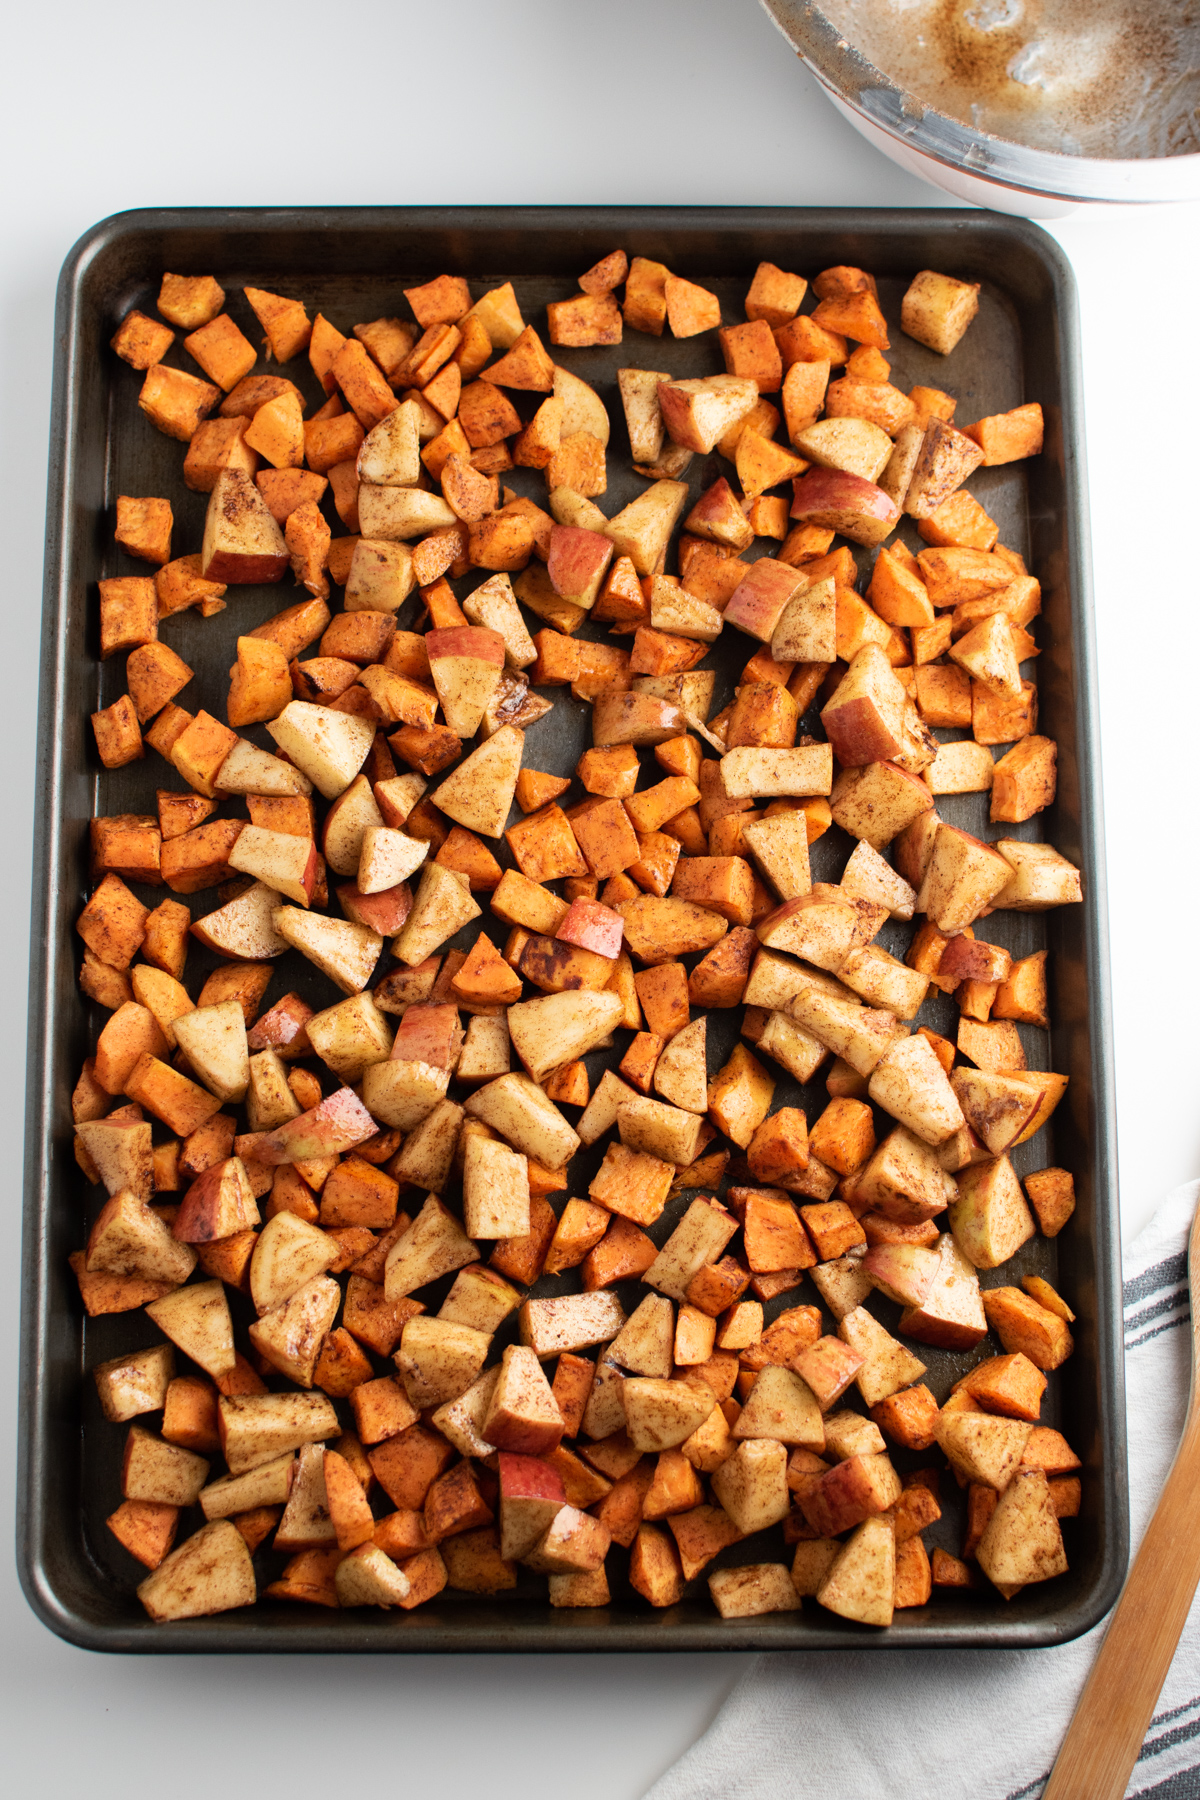 Roasted sweet potato and apple cubes cover a metal sheet pan.